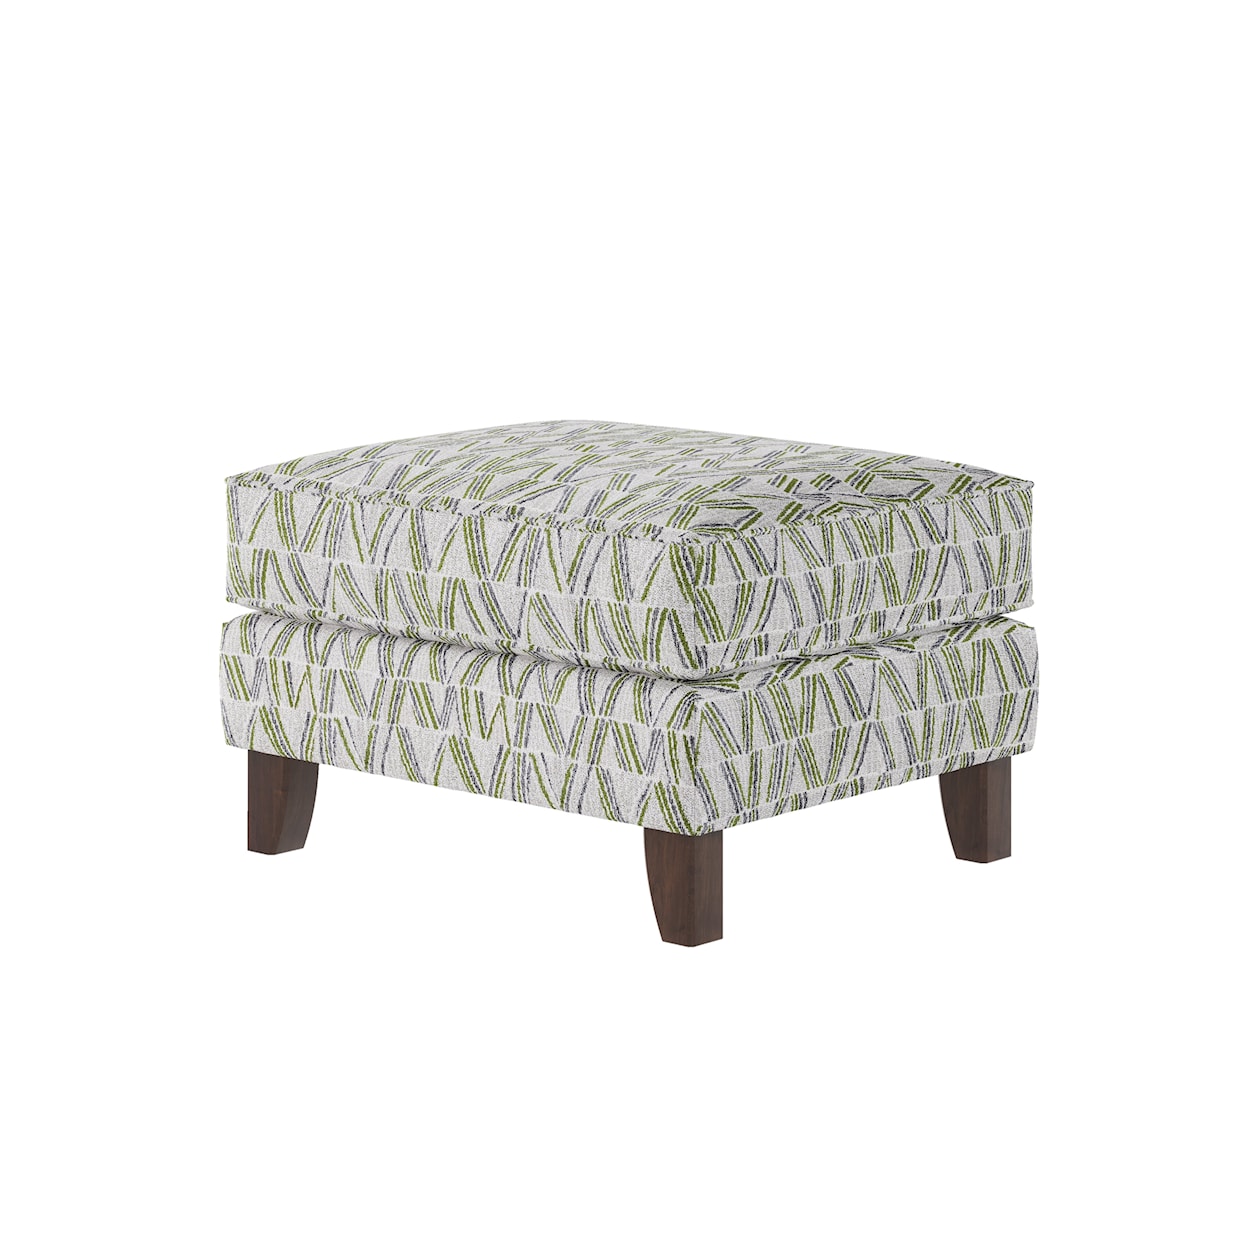 Fusion Furniture 1170 SATISFACTION METAL Accent Ottoman